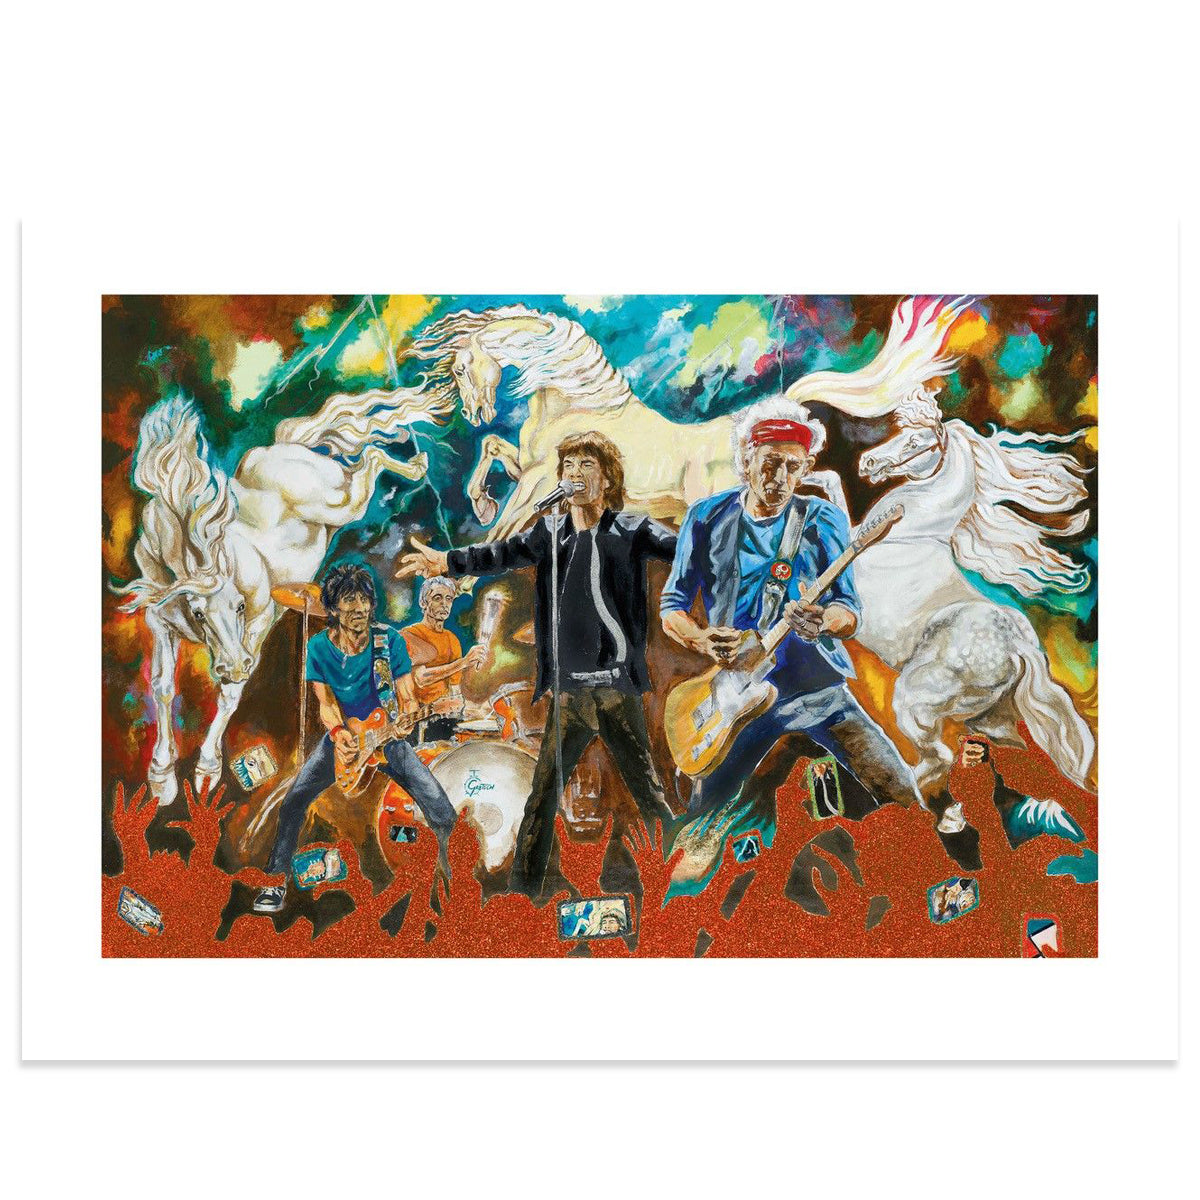 Ronnie Wood - Wild Horses - Collectors Series